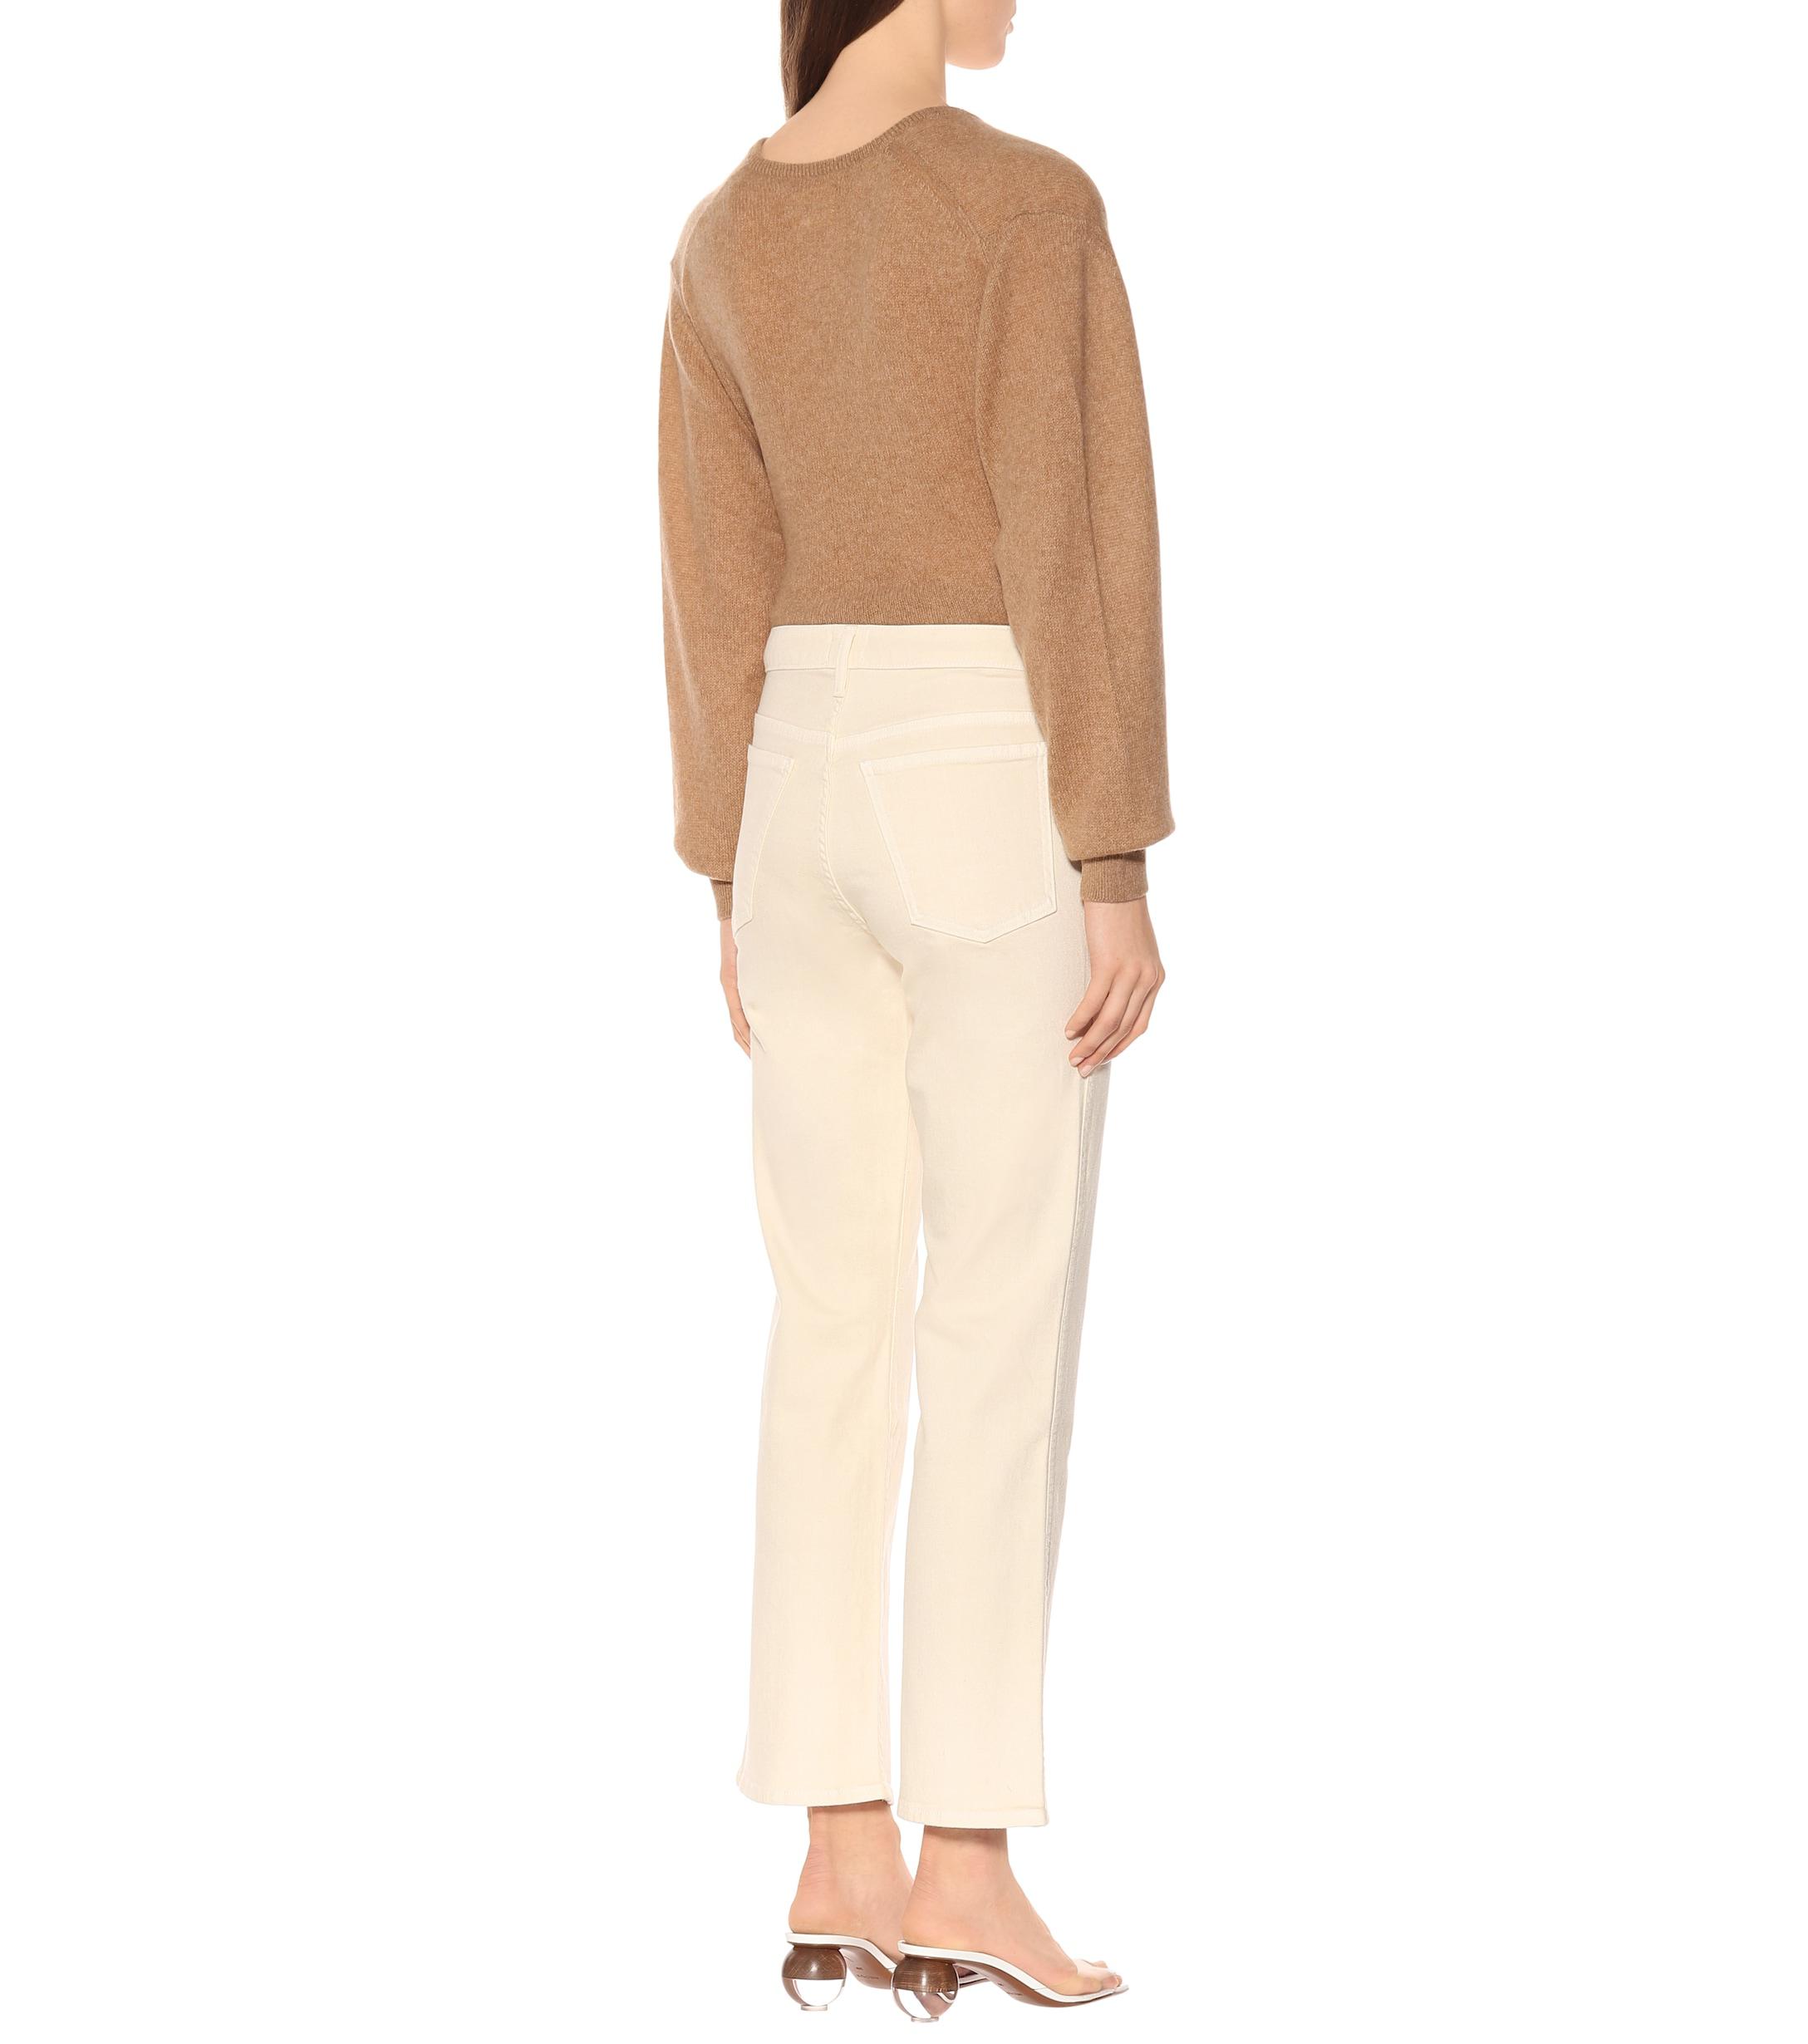 Khaite Stretch-cashmere Sweater in Camel (Natural) - Save 18% - Lyst